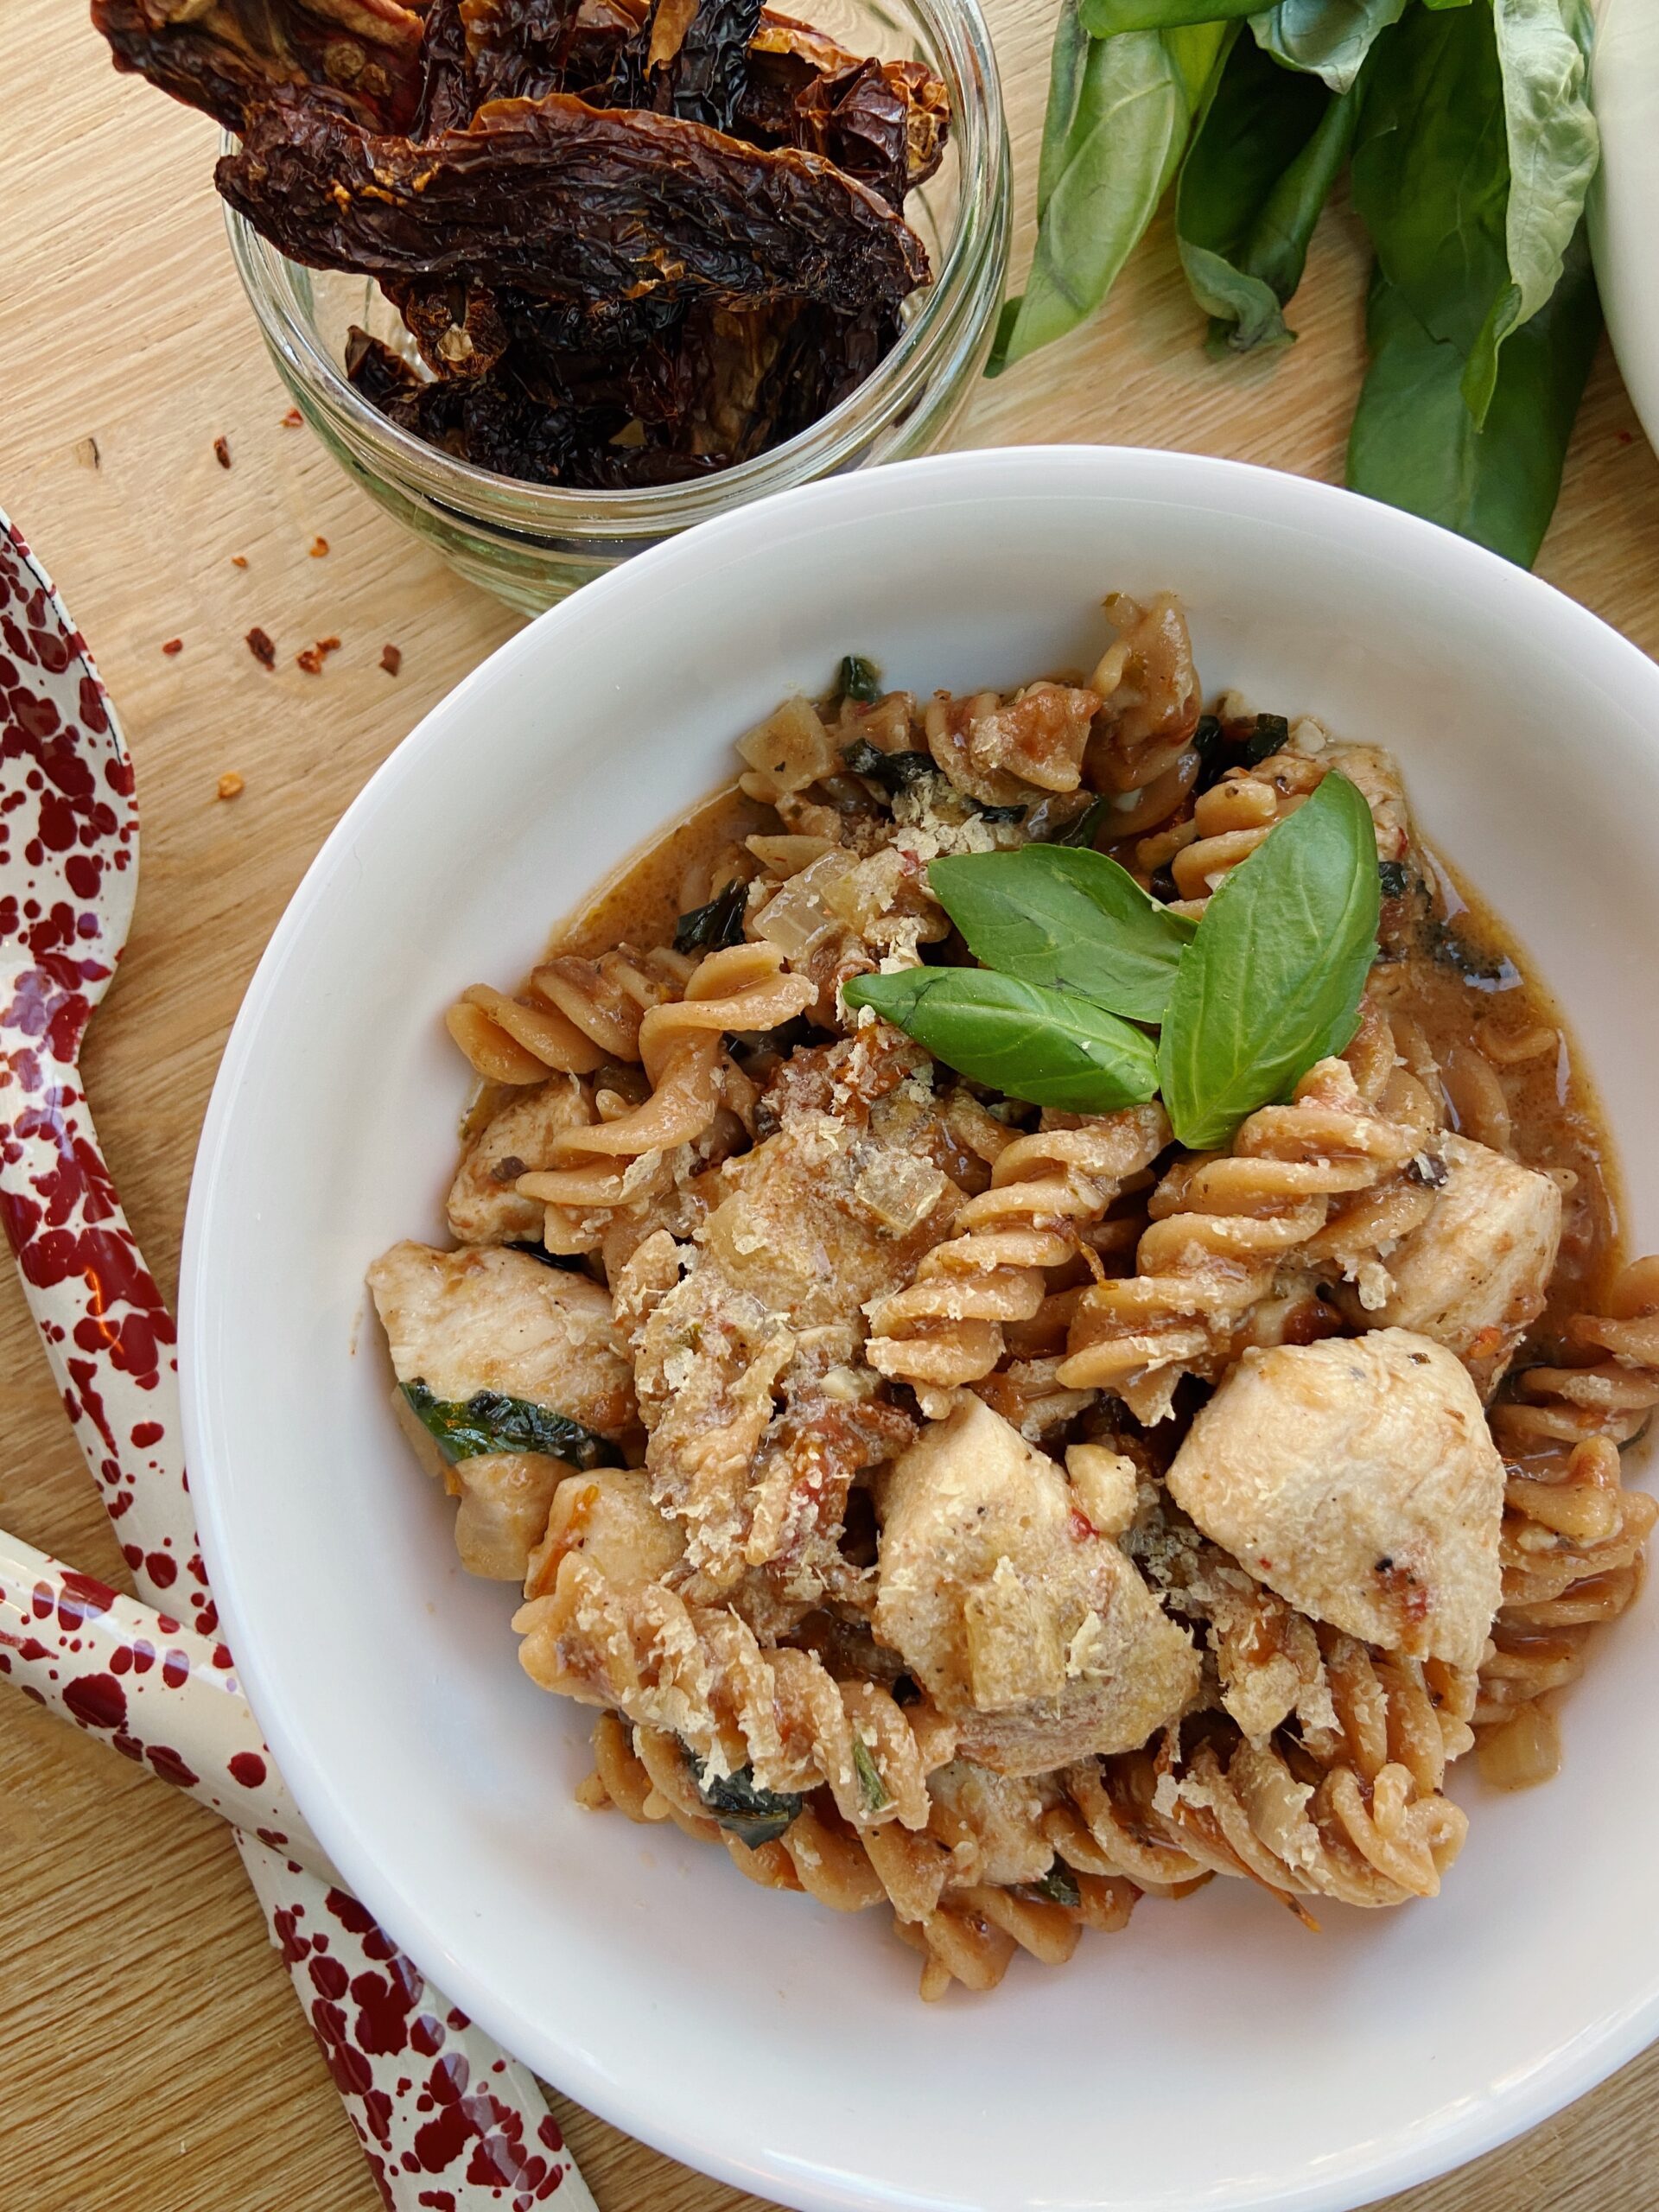 Creamy Sun Dried Tomato and Lentil Pasta with Chicken (Gluten Free, Dairy Free)